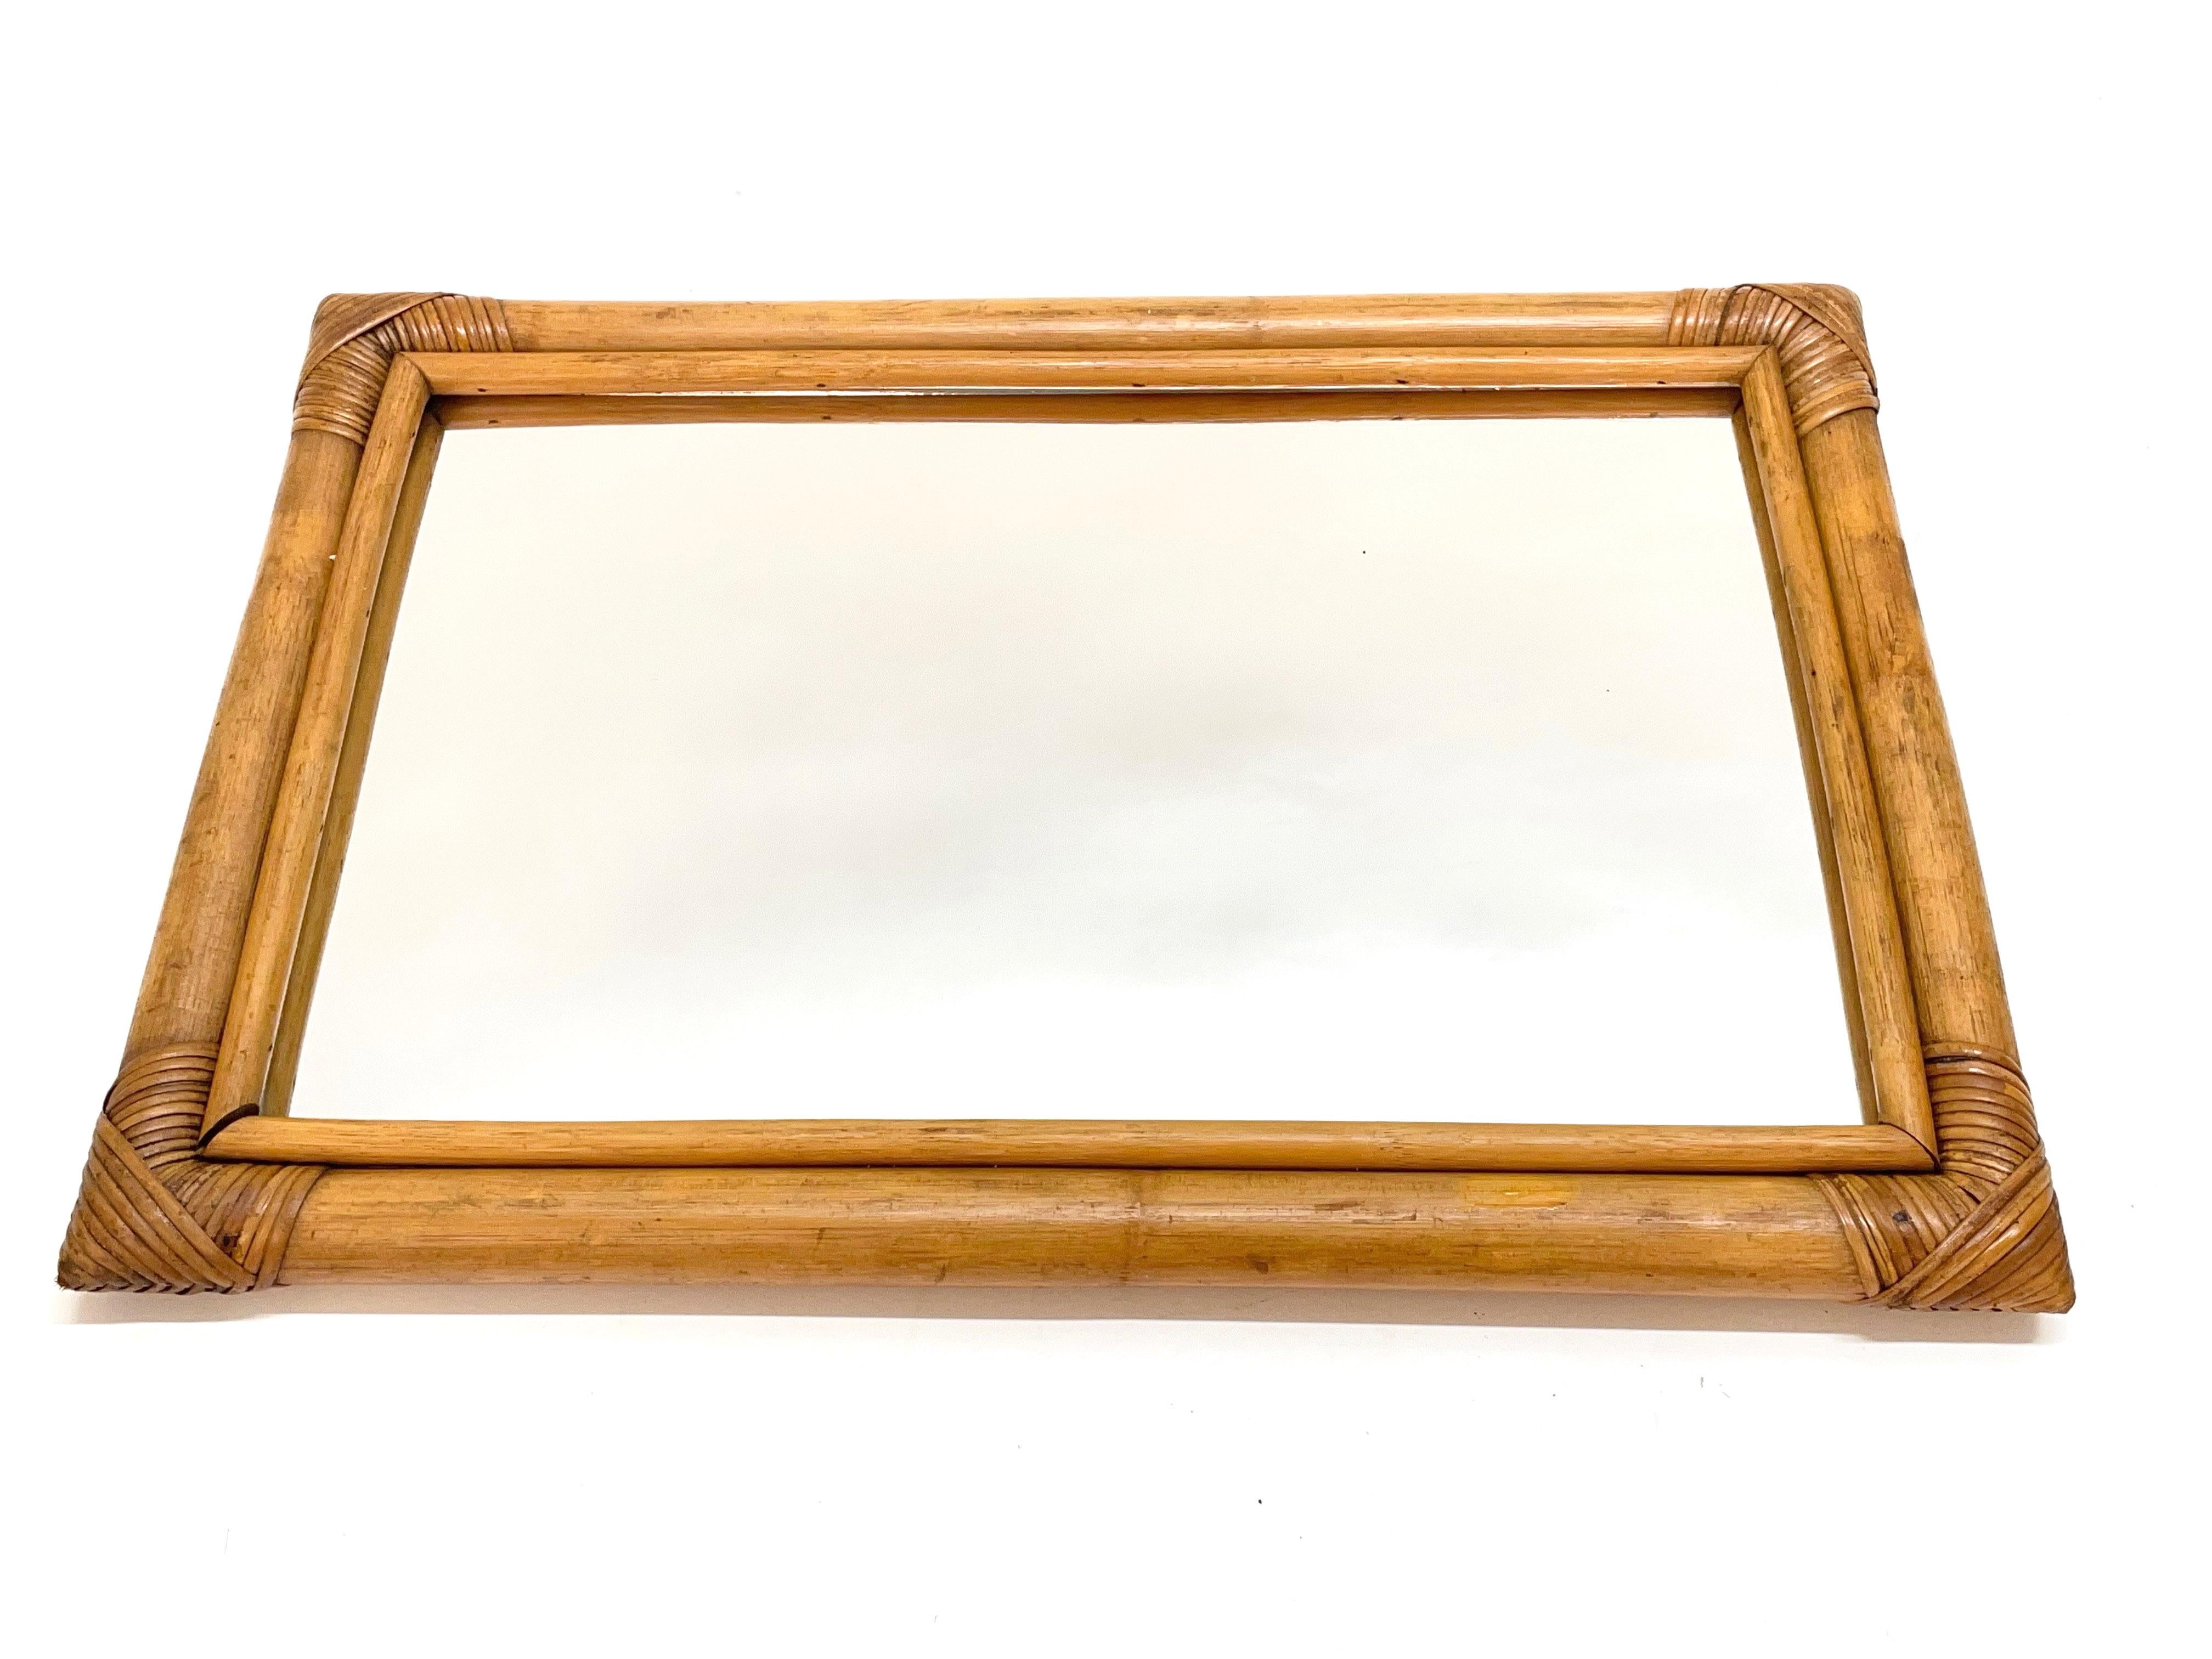 Wonderful midcentury rectangular mirror with a double bamboo cane weaved wicker frame. This amazing item was produced in Italy during the 1960s.

The way in which bamboo lines and glass integrate is superb and coveys neverending charm to this